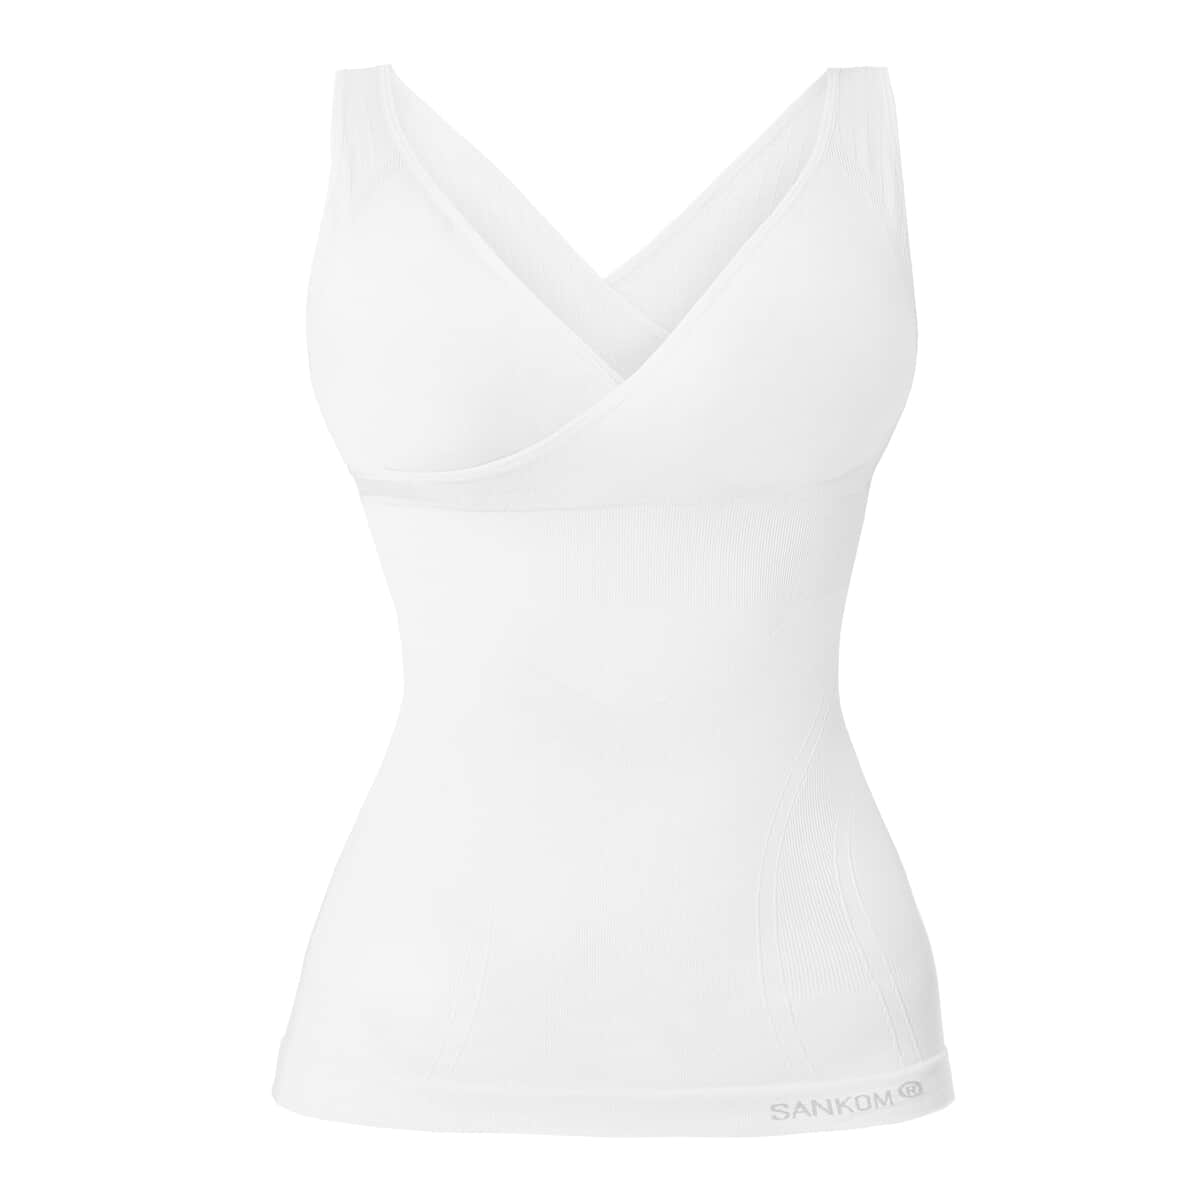 SANKOM Patent Classic Shaping Camisole with Bra - M/L , White image number 0